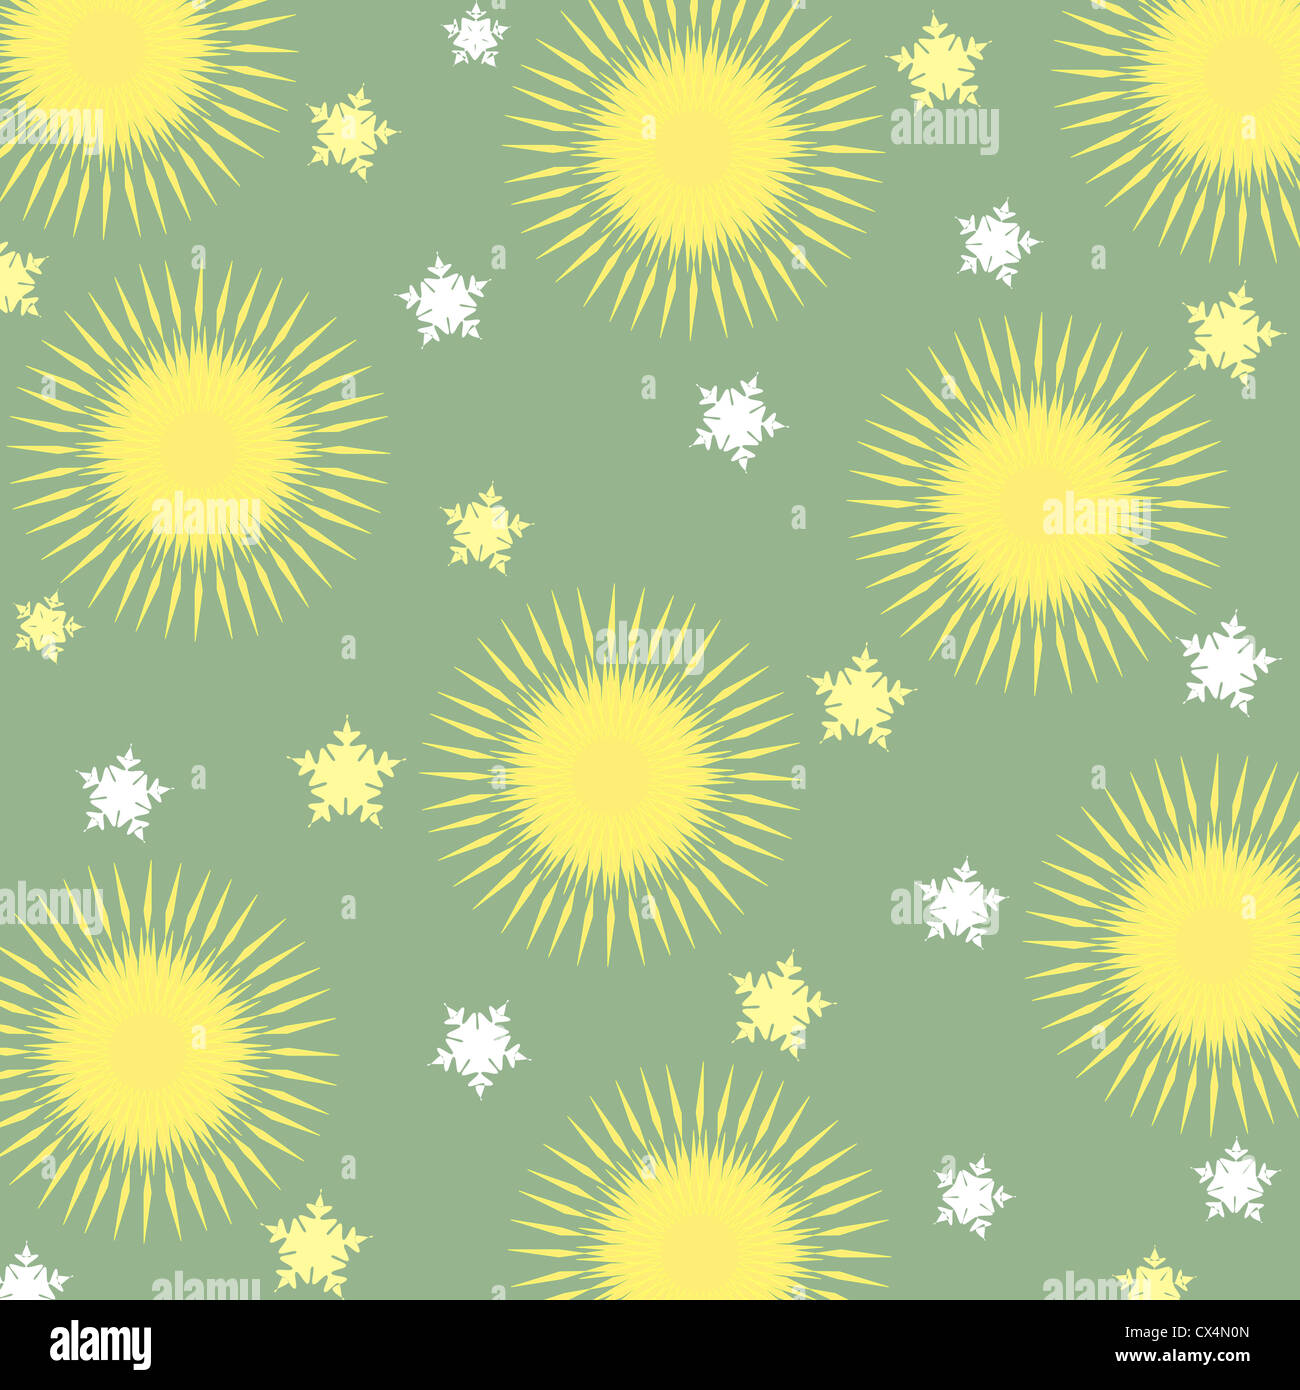 Seamless flowers and stars pattern in yellow and white on green Stock Photo